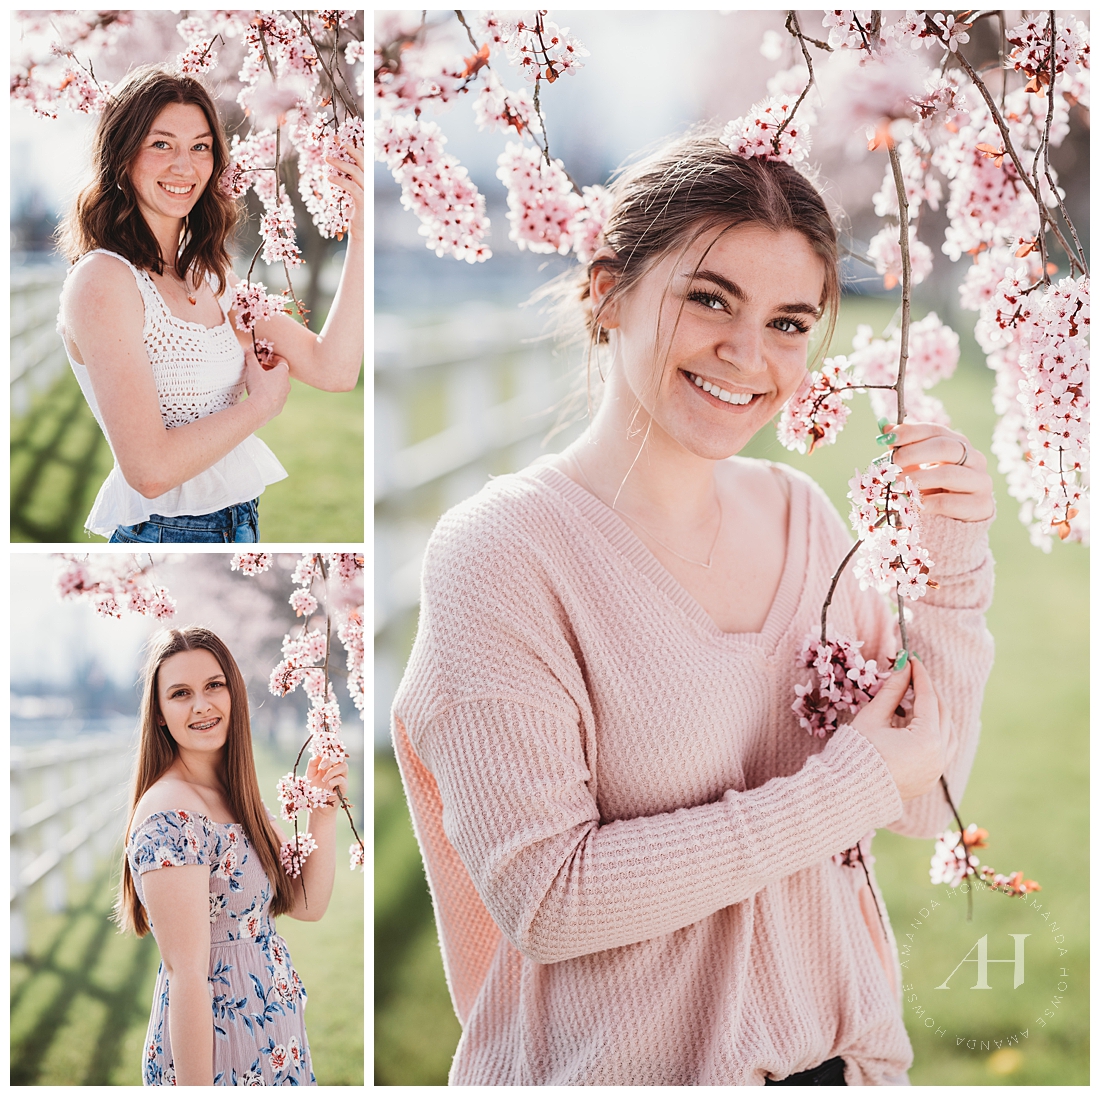 Posing with the Cherry Blossom Trees | Model Team Shoot, Spring is in the Air | Photographed by the Best Tacoma, Washington Senior Photographer Amanda Howse Photography